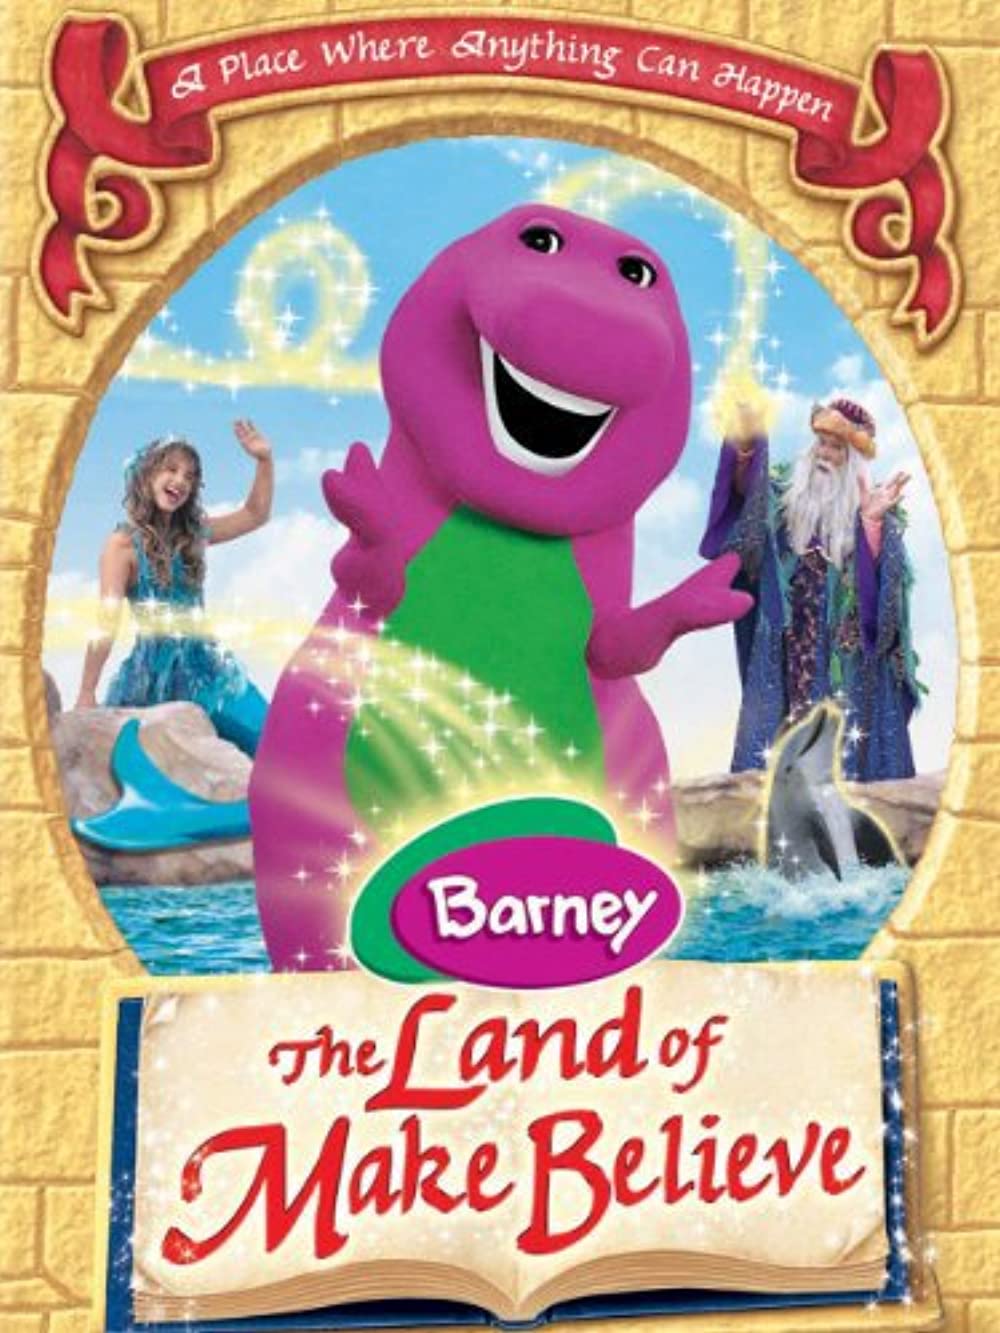 Download Barney: The Land of Make Believe Movie | Barney: The Land Of Make Believe Hd, Dvd